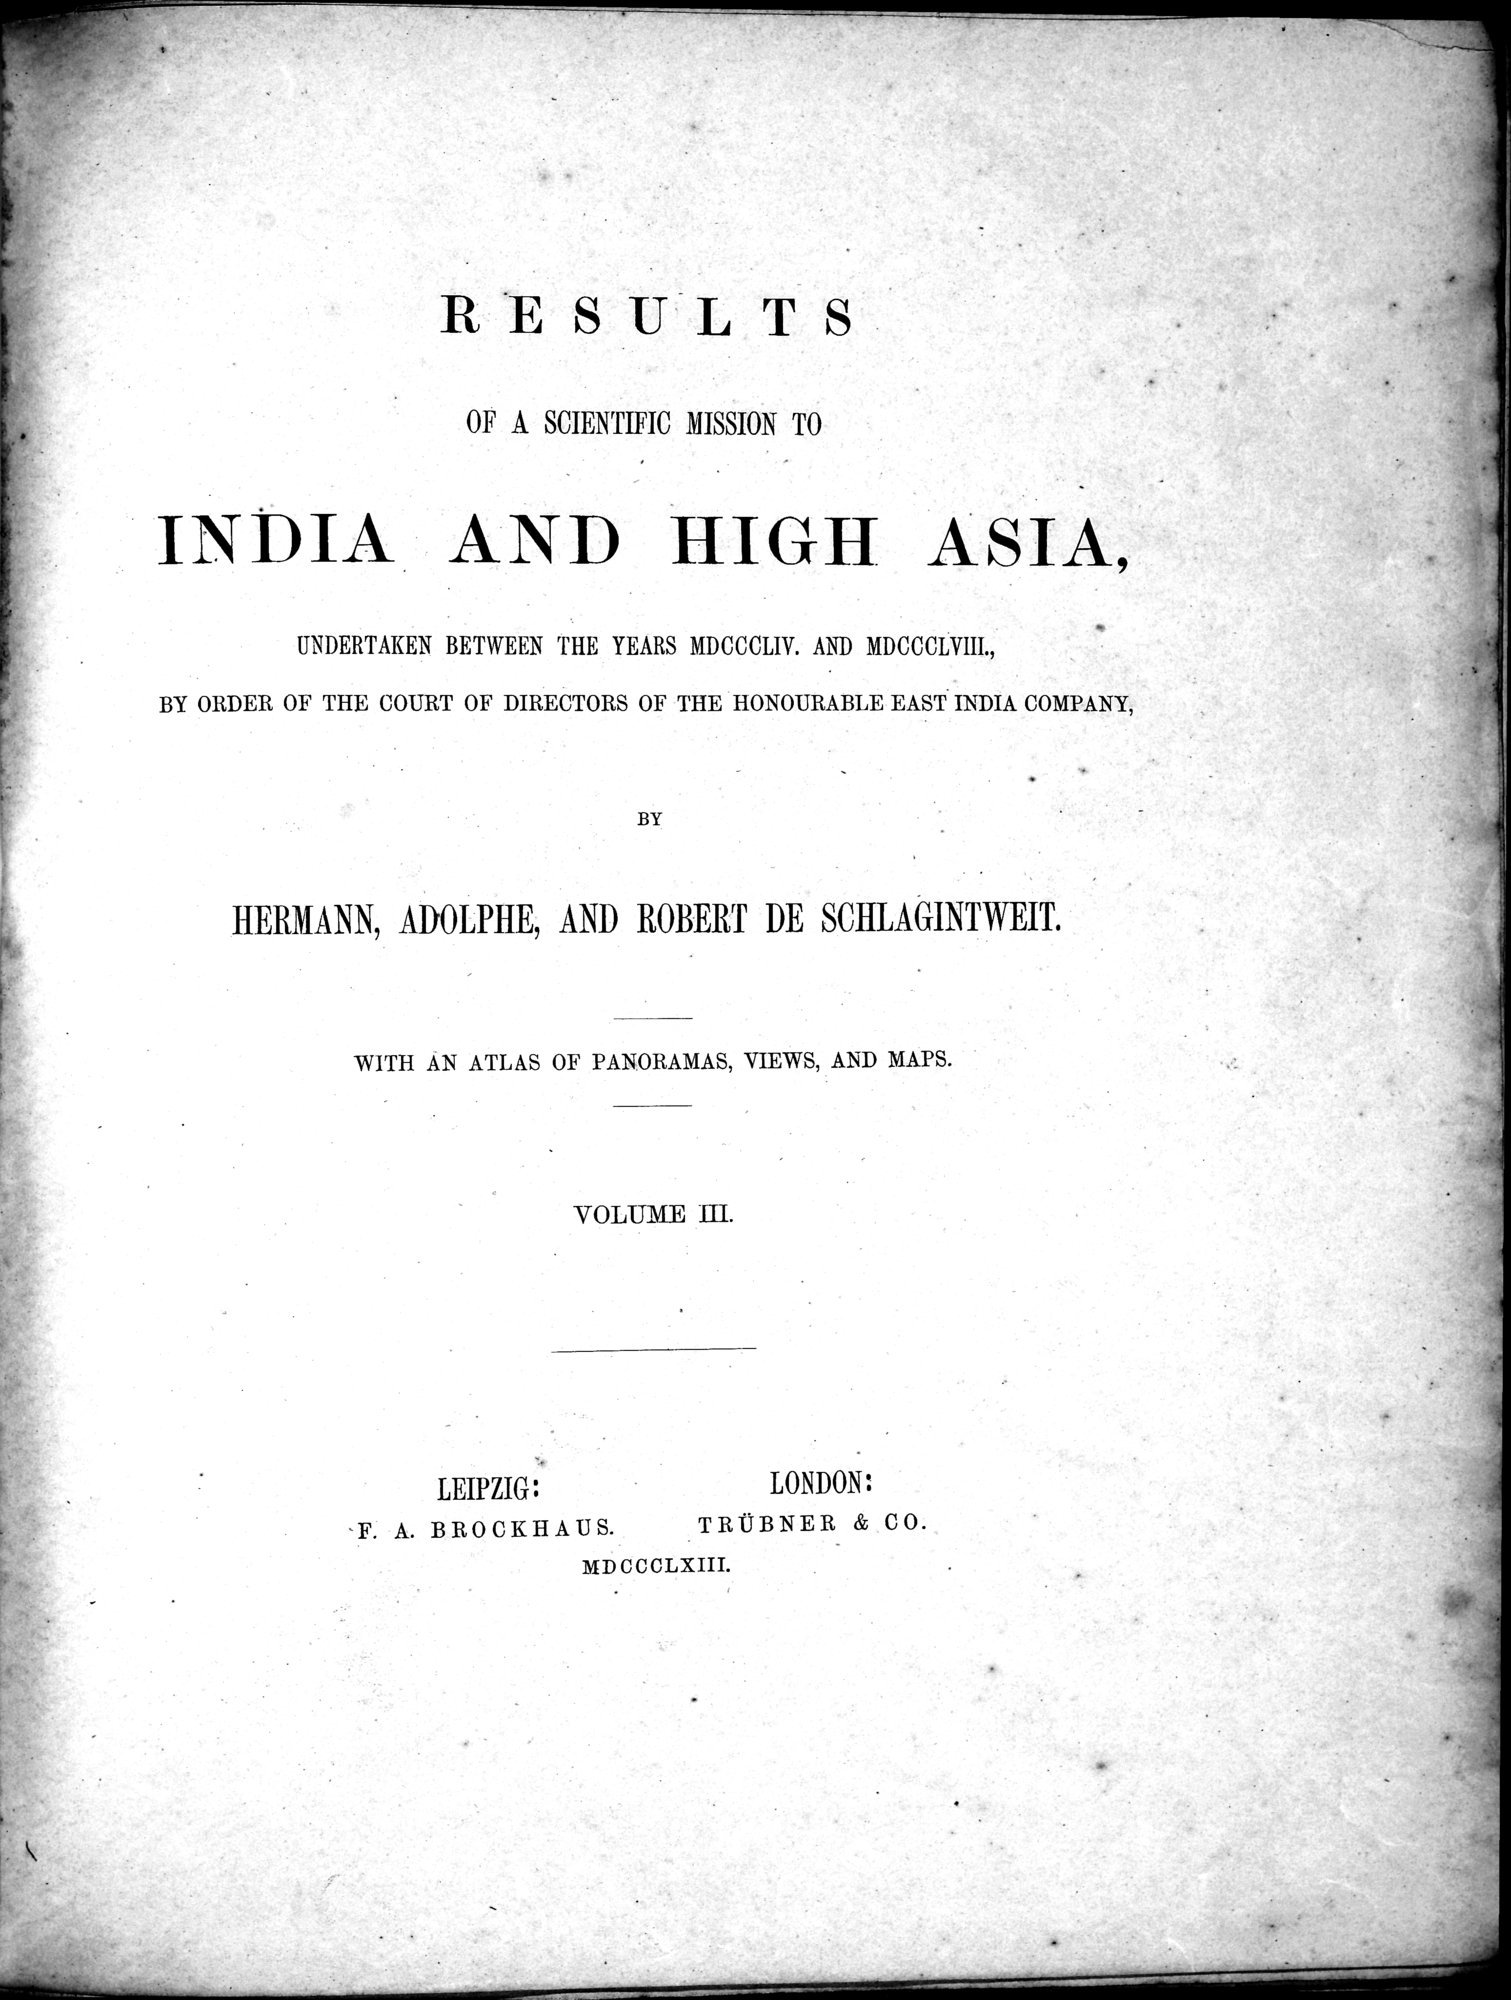 Results of a Scientific Mission to India and High Asia : vol.3 / Page 7 (Grayscale High Resolution Image)